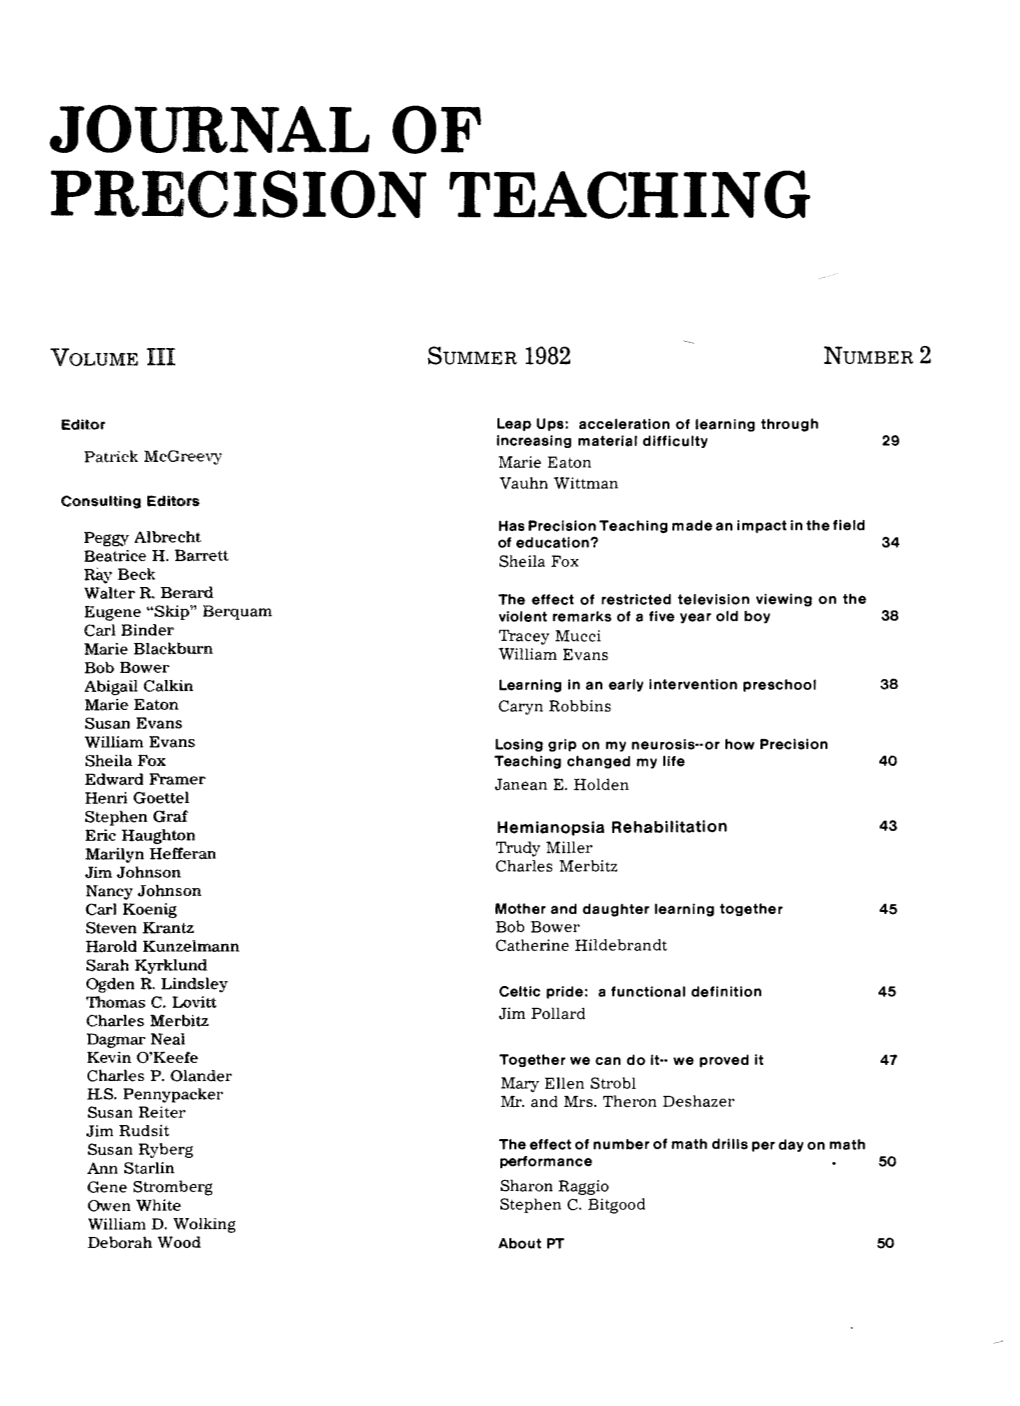 Journal of Precision Teaching Volume 3 Number 2